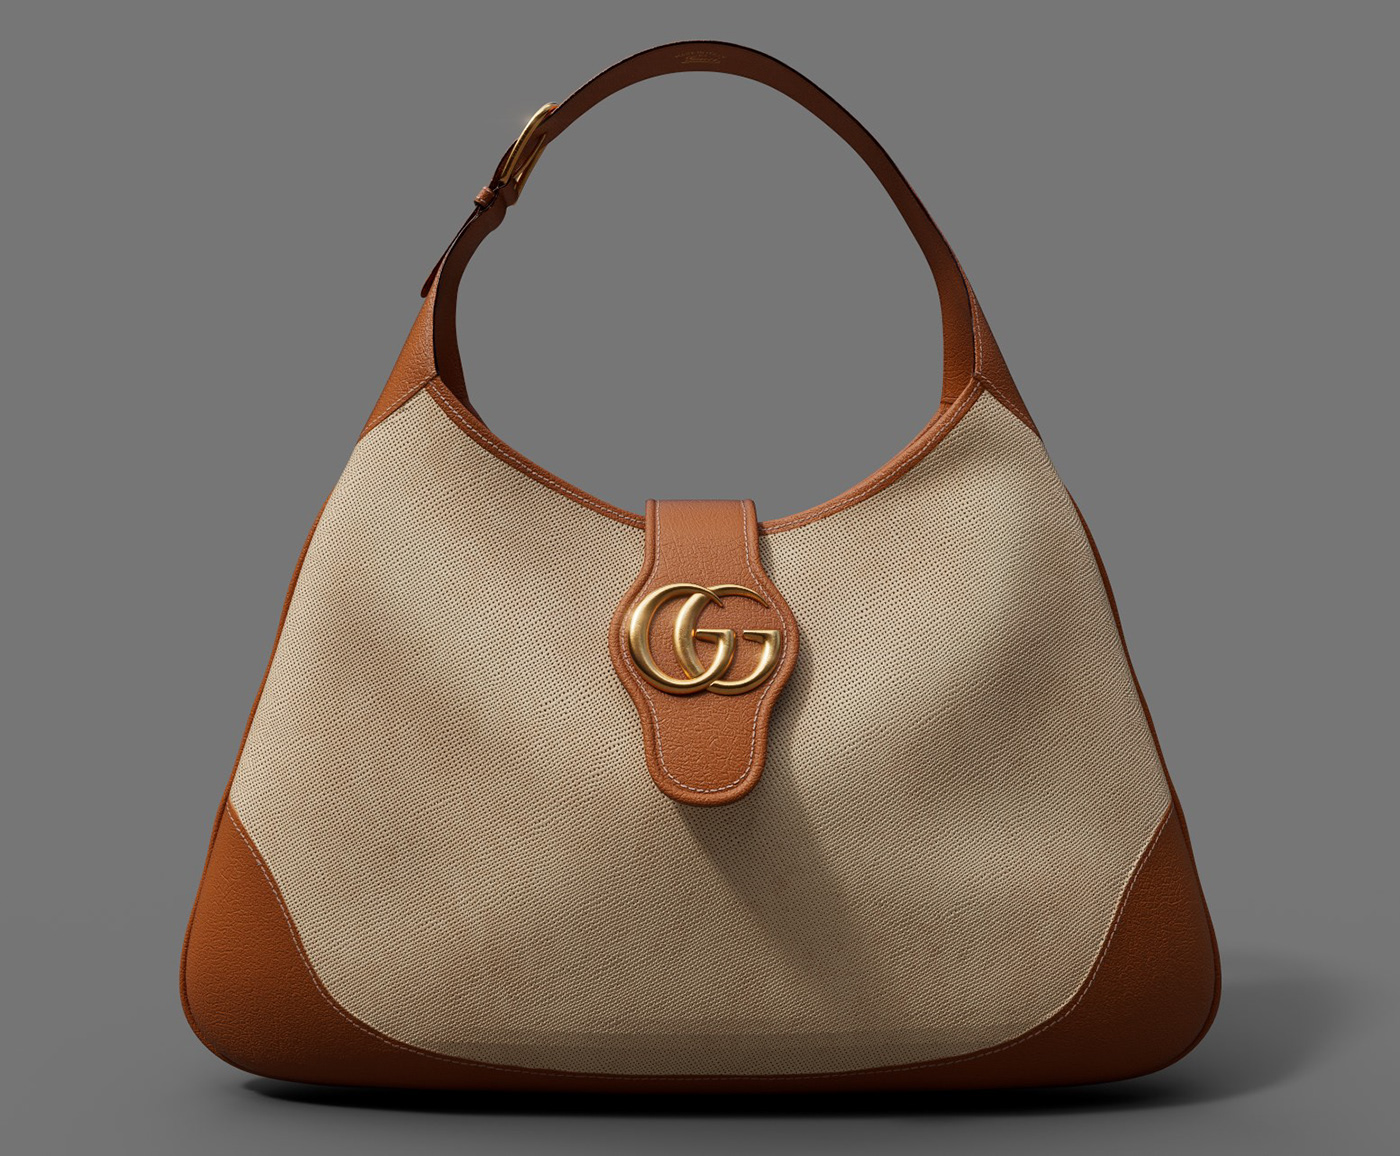 gucci purse augmented reality 3D